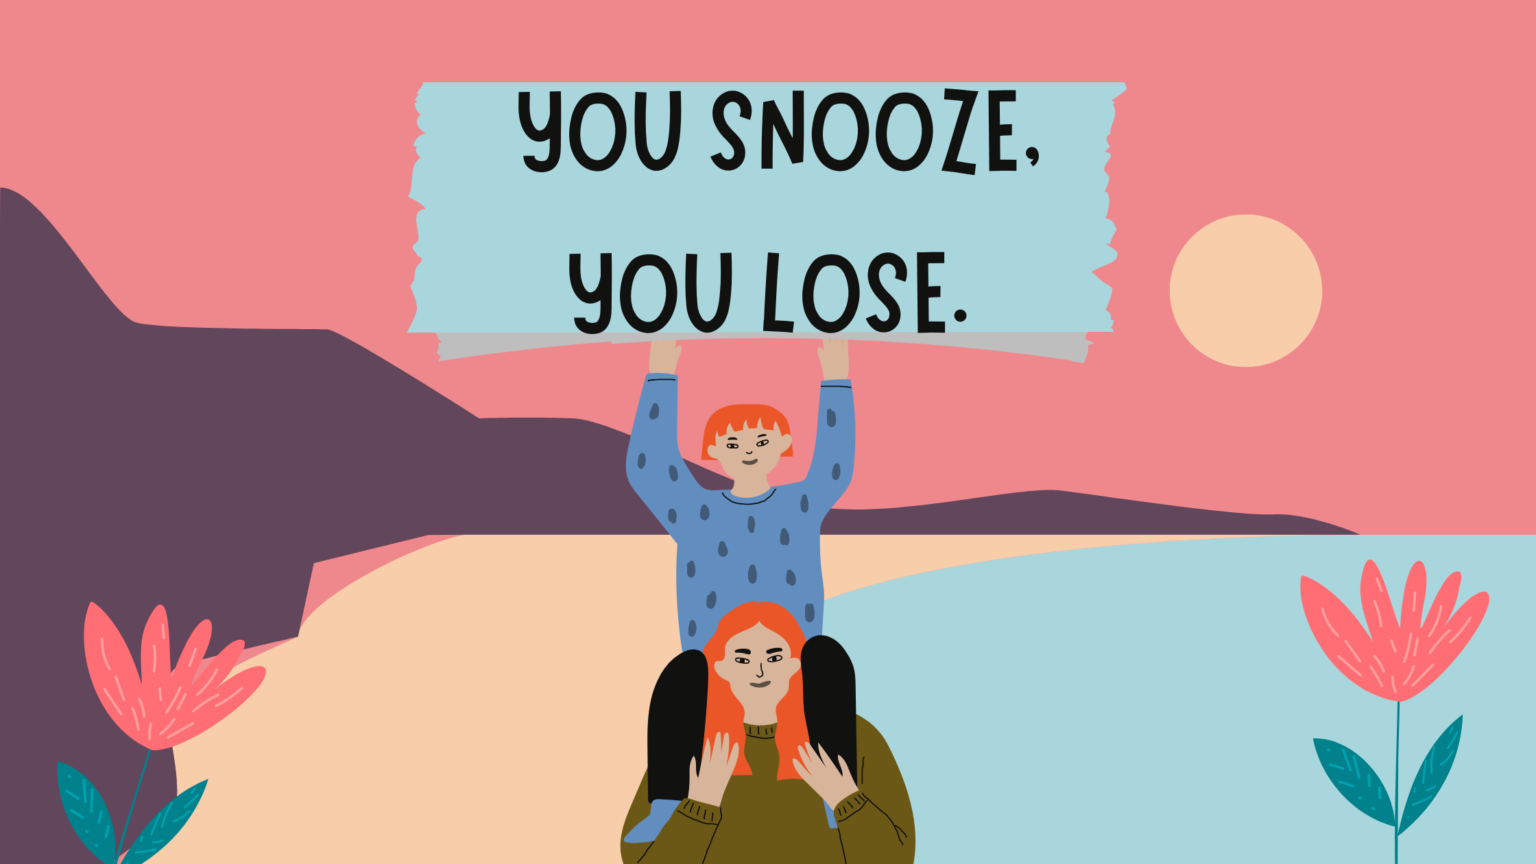 You snooze, you lose.